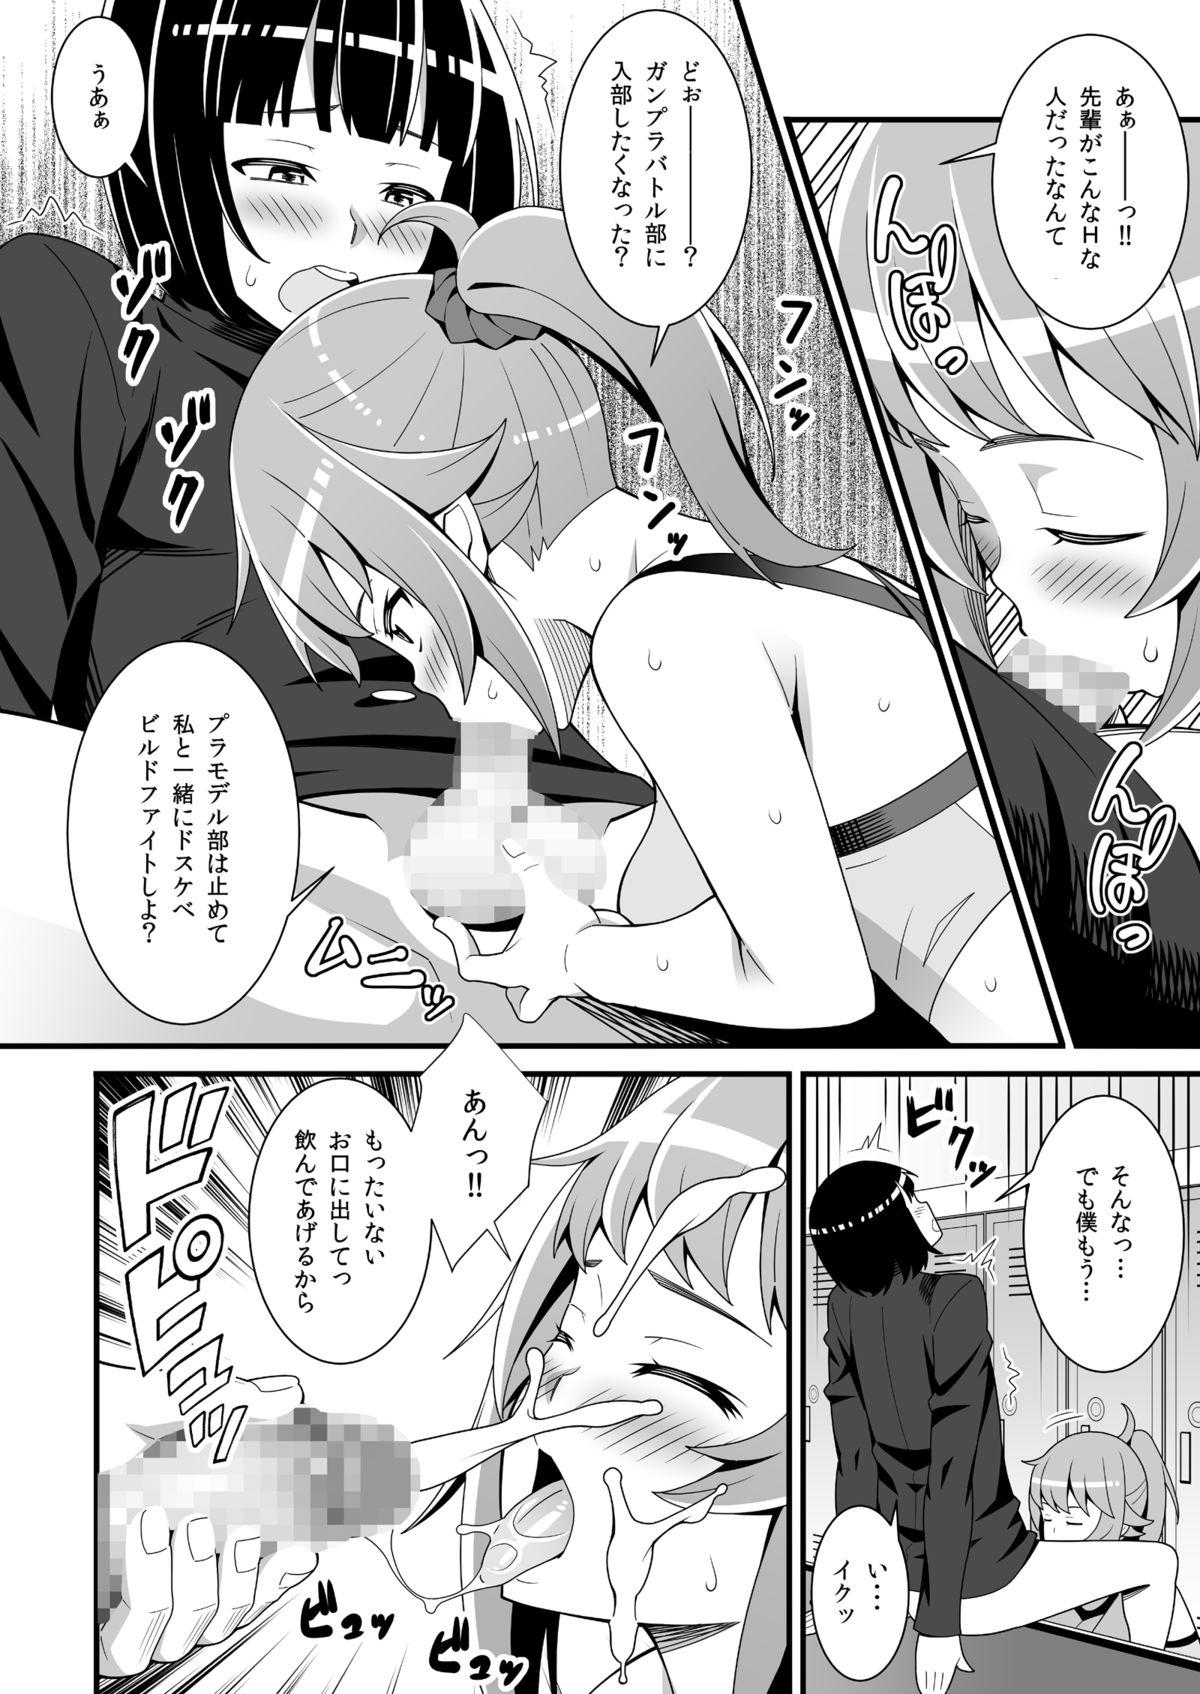 Spooning Buchou no Dosukebe Buin Kanyuu Try - Gundam build fighters try Asslicking - Page 11